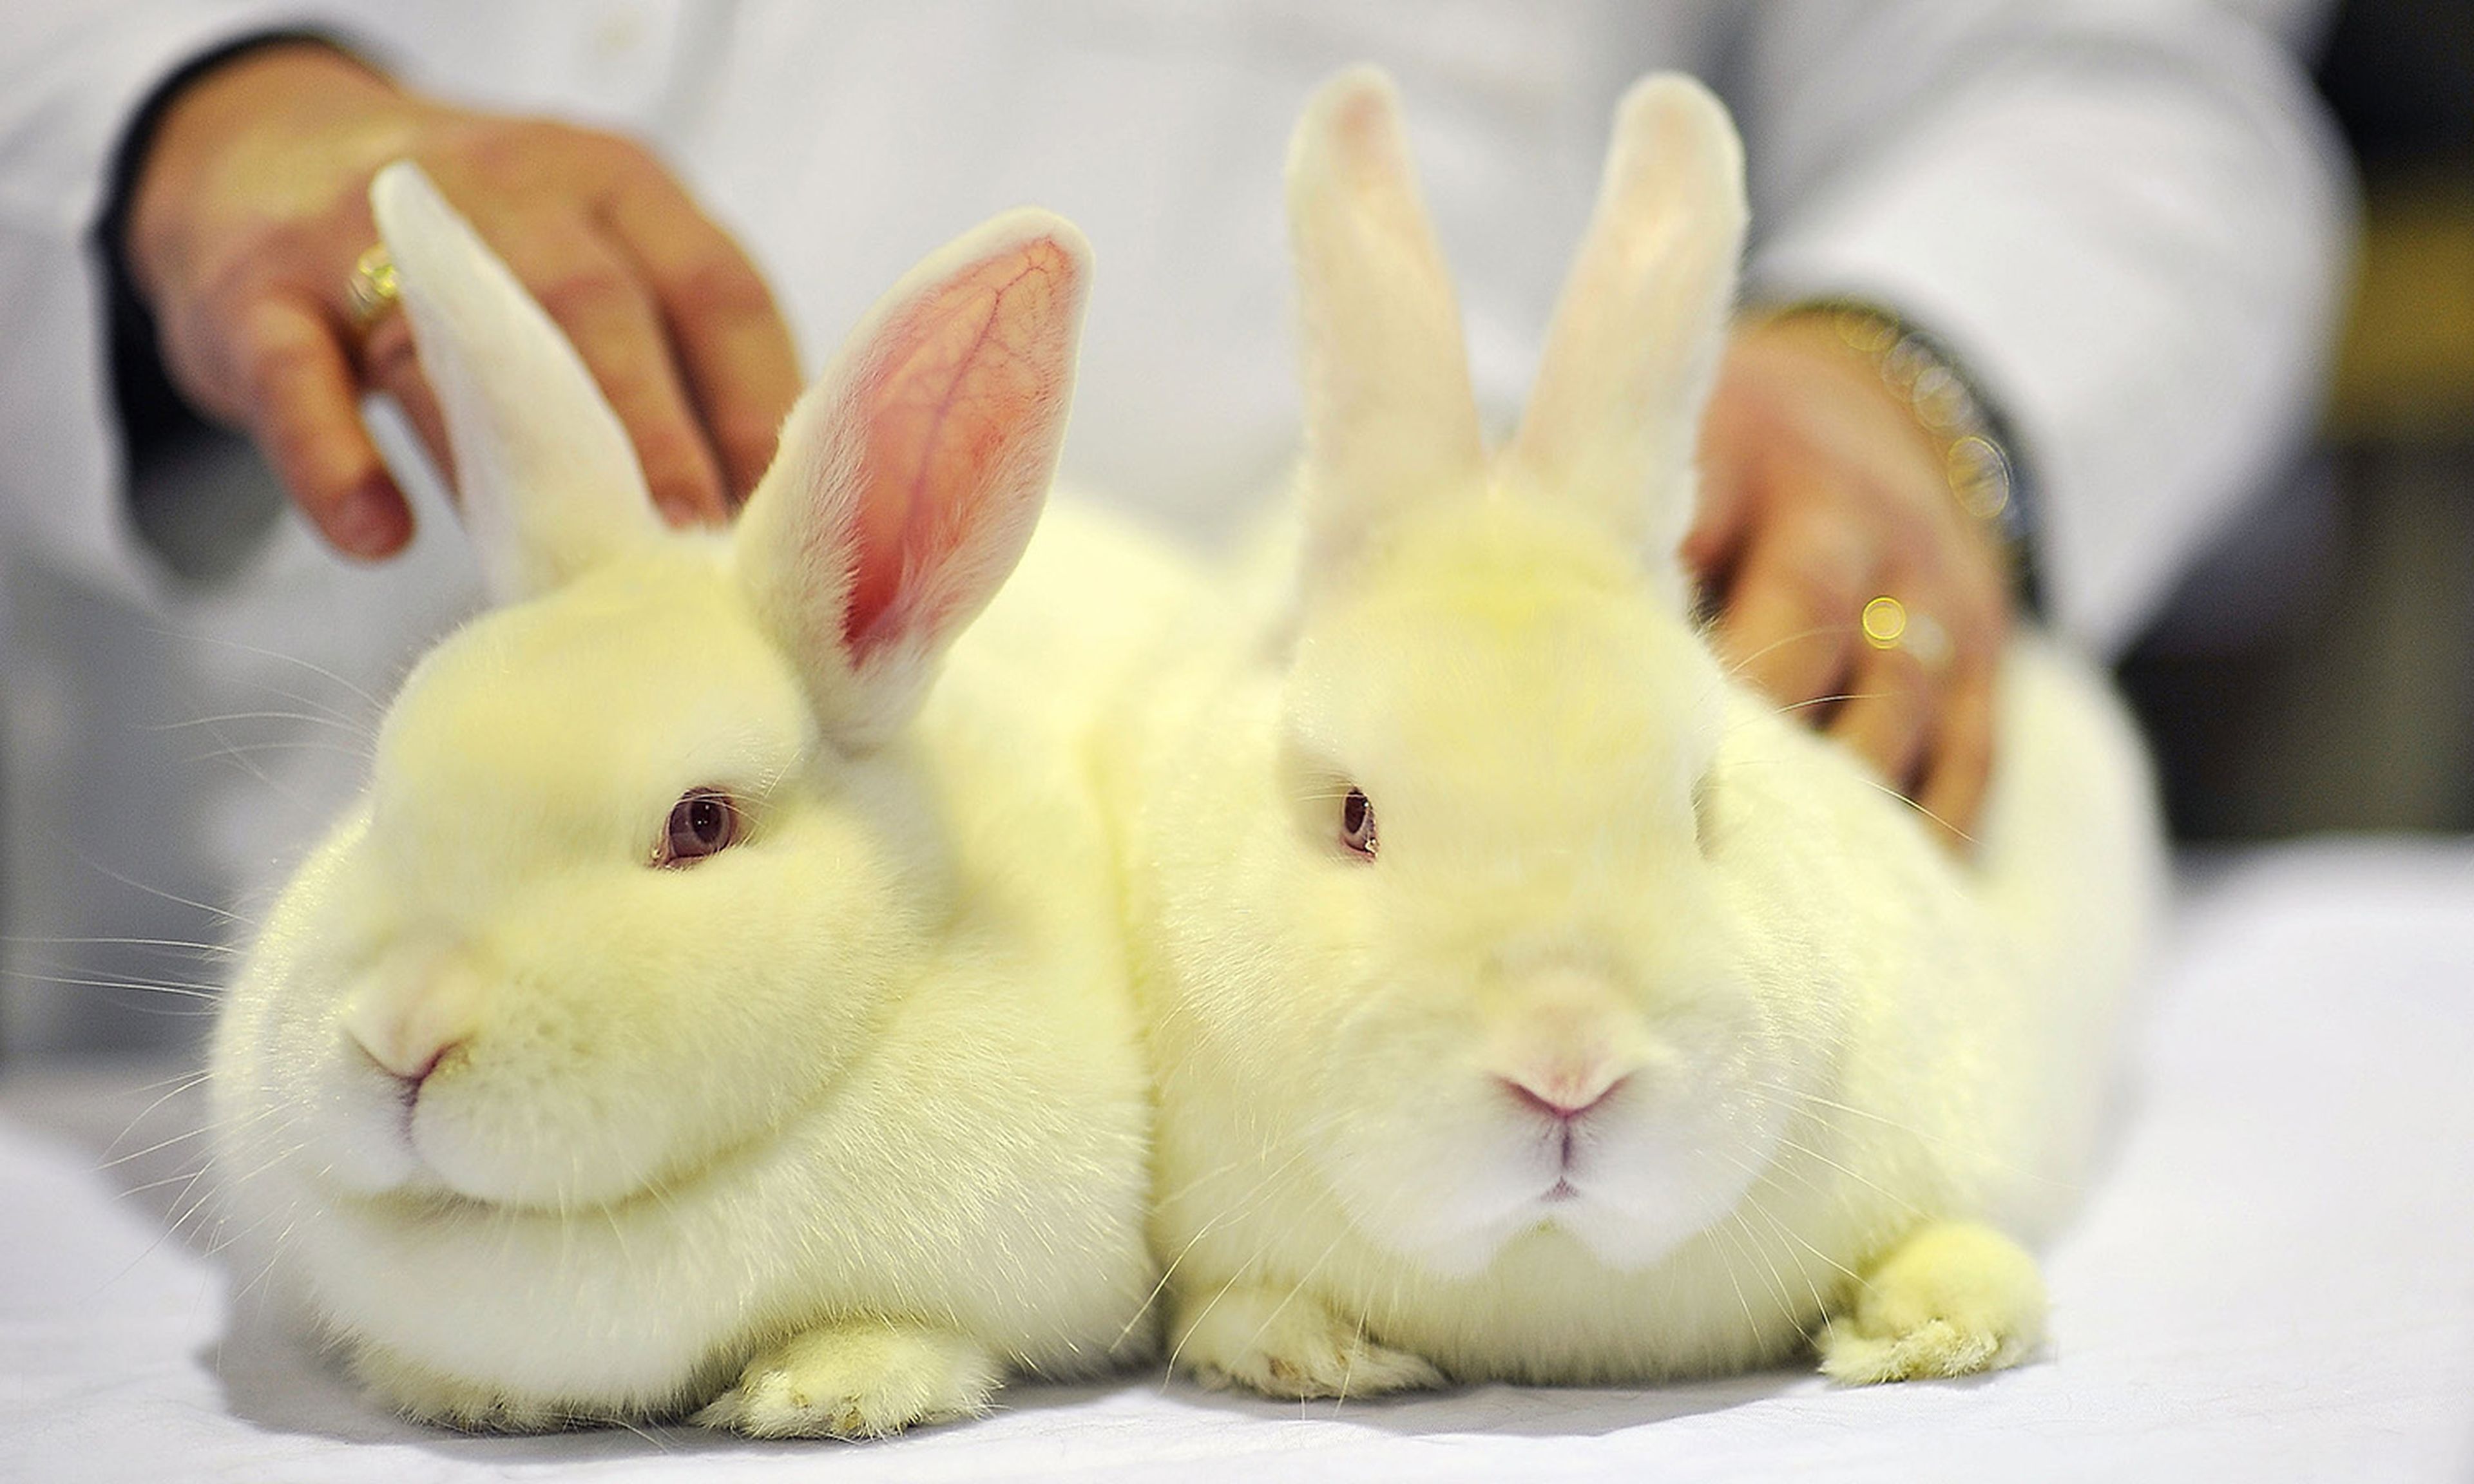 Researchers are calling a new strain of ransomware that targeted a U.S. bank last week &#8220;White Rabbit.&#8221; Pictured: White rabbits are judged on Jan. 28, 2012, in Harrogate, England. (Photo by Bethany Clarke/Getty Images)